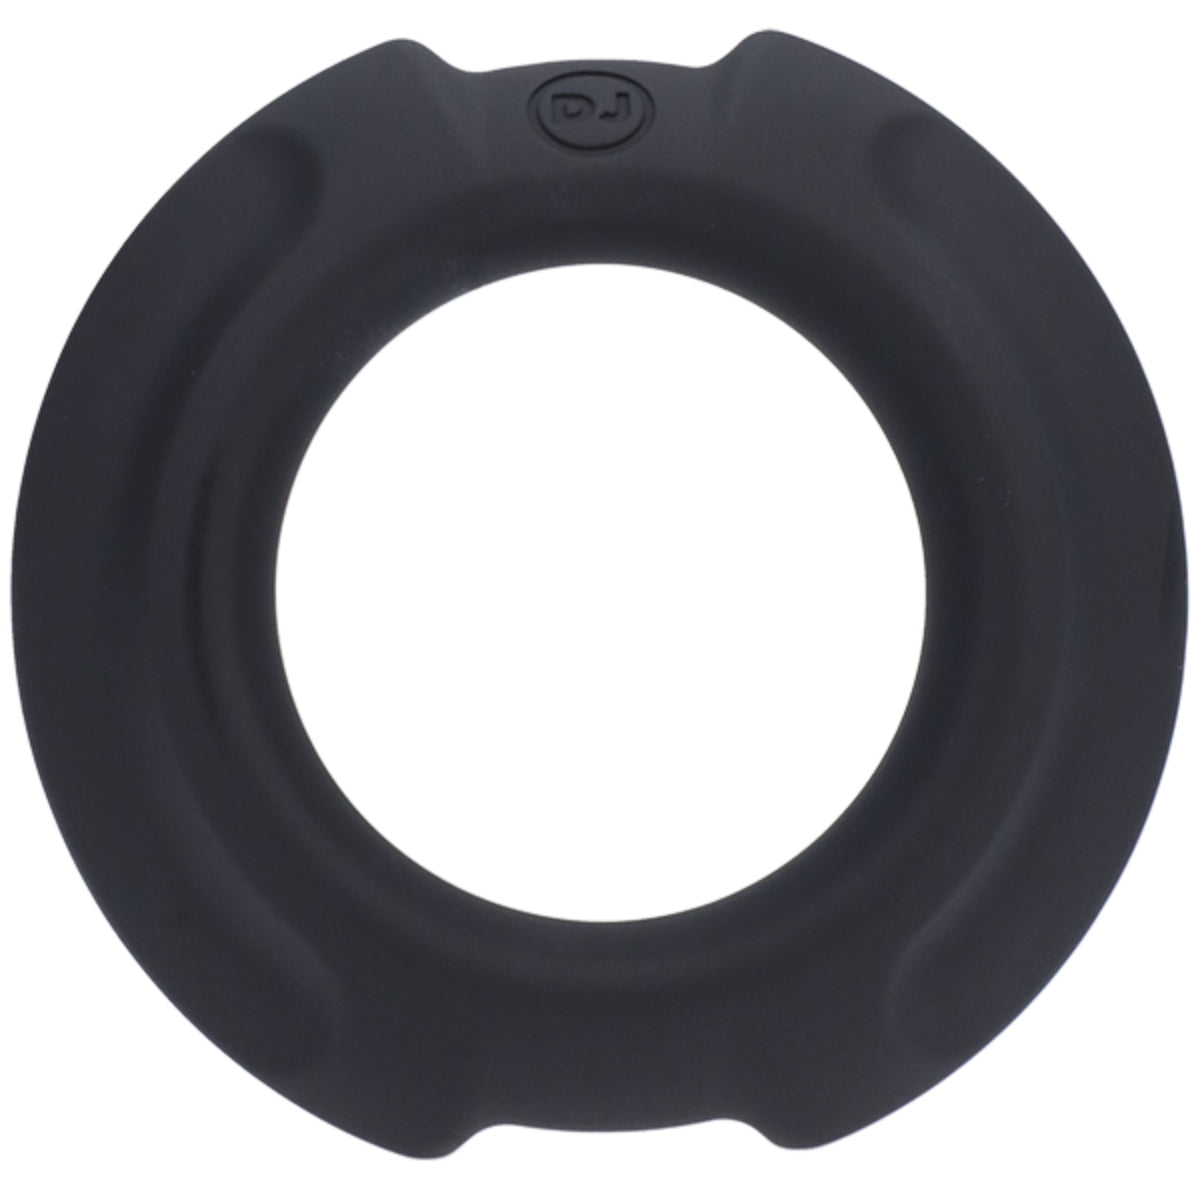 OptiMALE FlexiSteel Silicone Metal Core Cock Ring Black 35mm